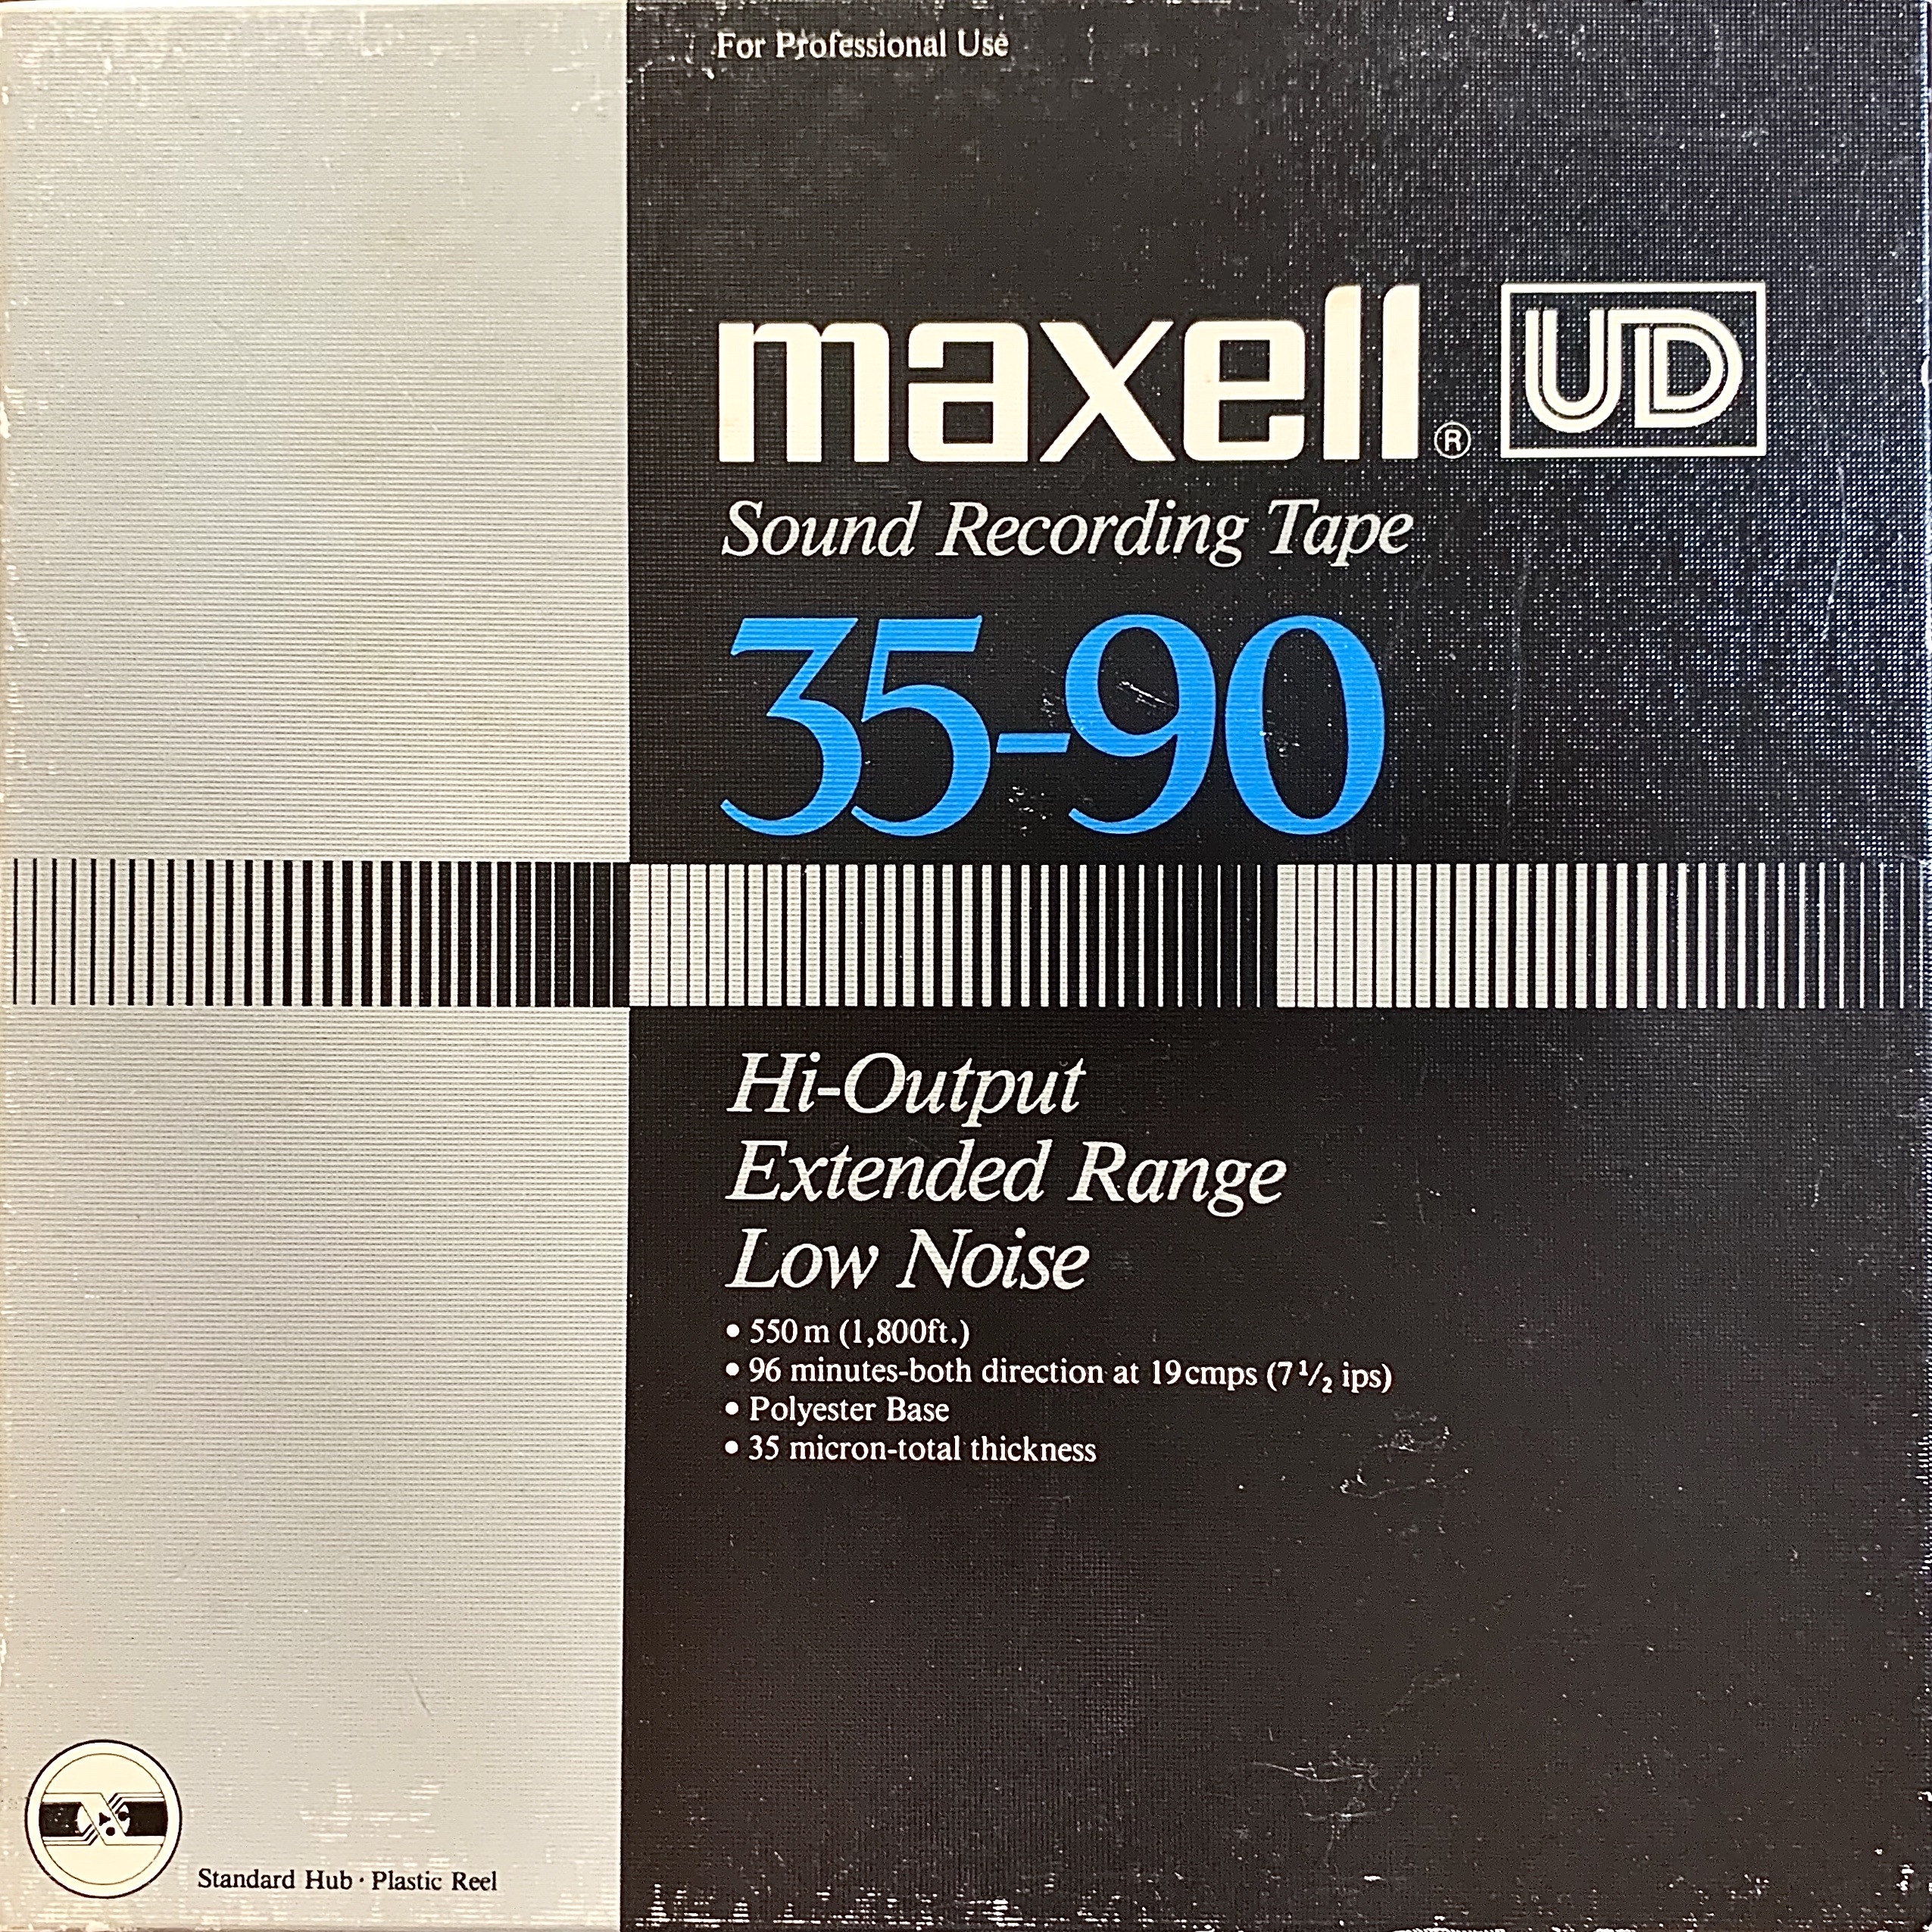 Maxell UD XL 35-180B Reel to Reel Tape [Unopened]